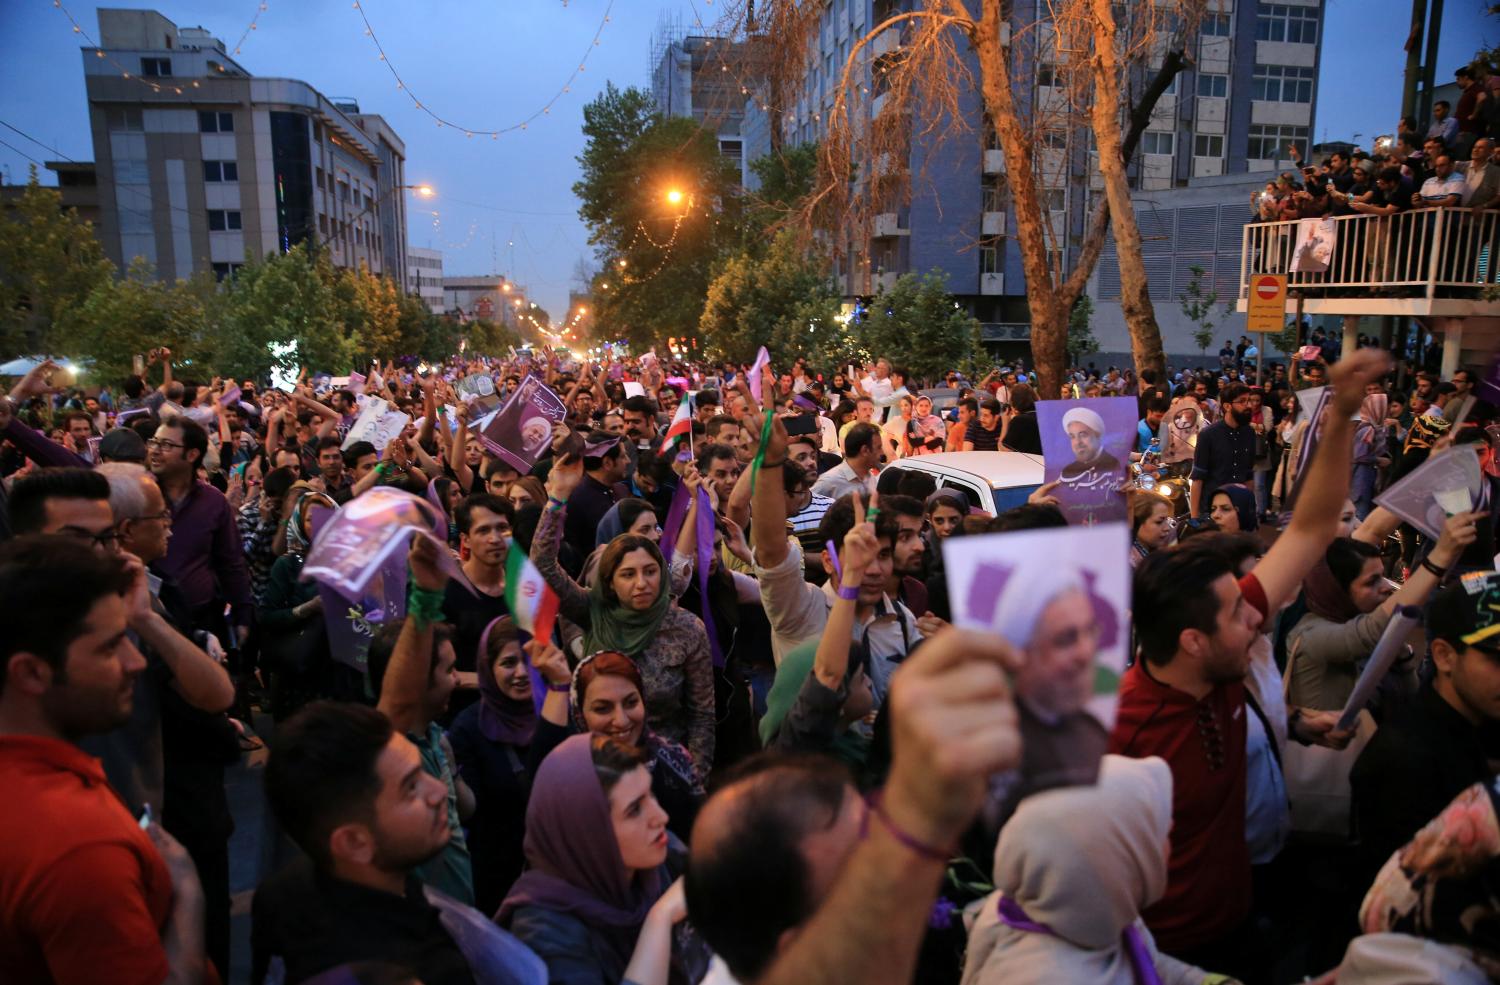 Supporters of Iranian president Hassan Rouhani gather as they celebrate his victory in the presidential election in Tehran, Iran, May 20, 2017. TIMA via REUTERS ATTENTION EDITORS - THIS IMAGE WAS PROVIDED BY A THIRD PARTY. FOR EDITORIAL USE ONLY. - RTX36R1Q